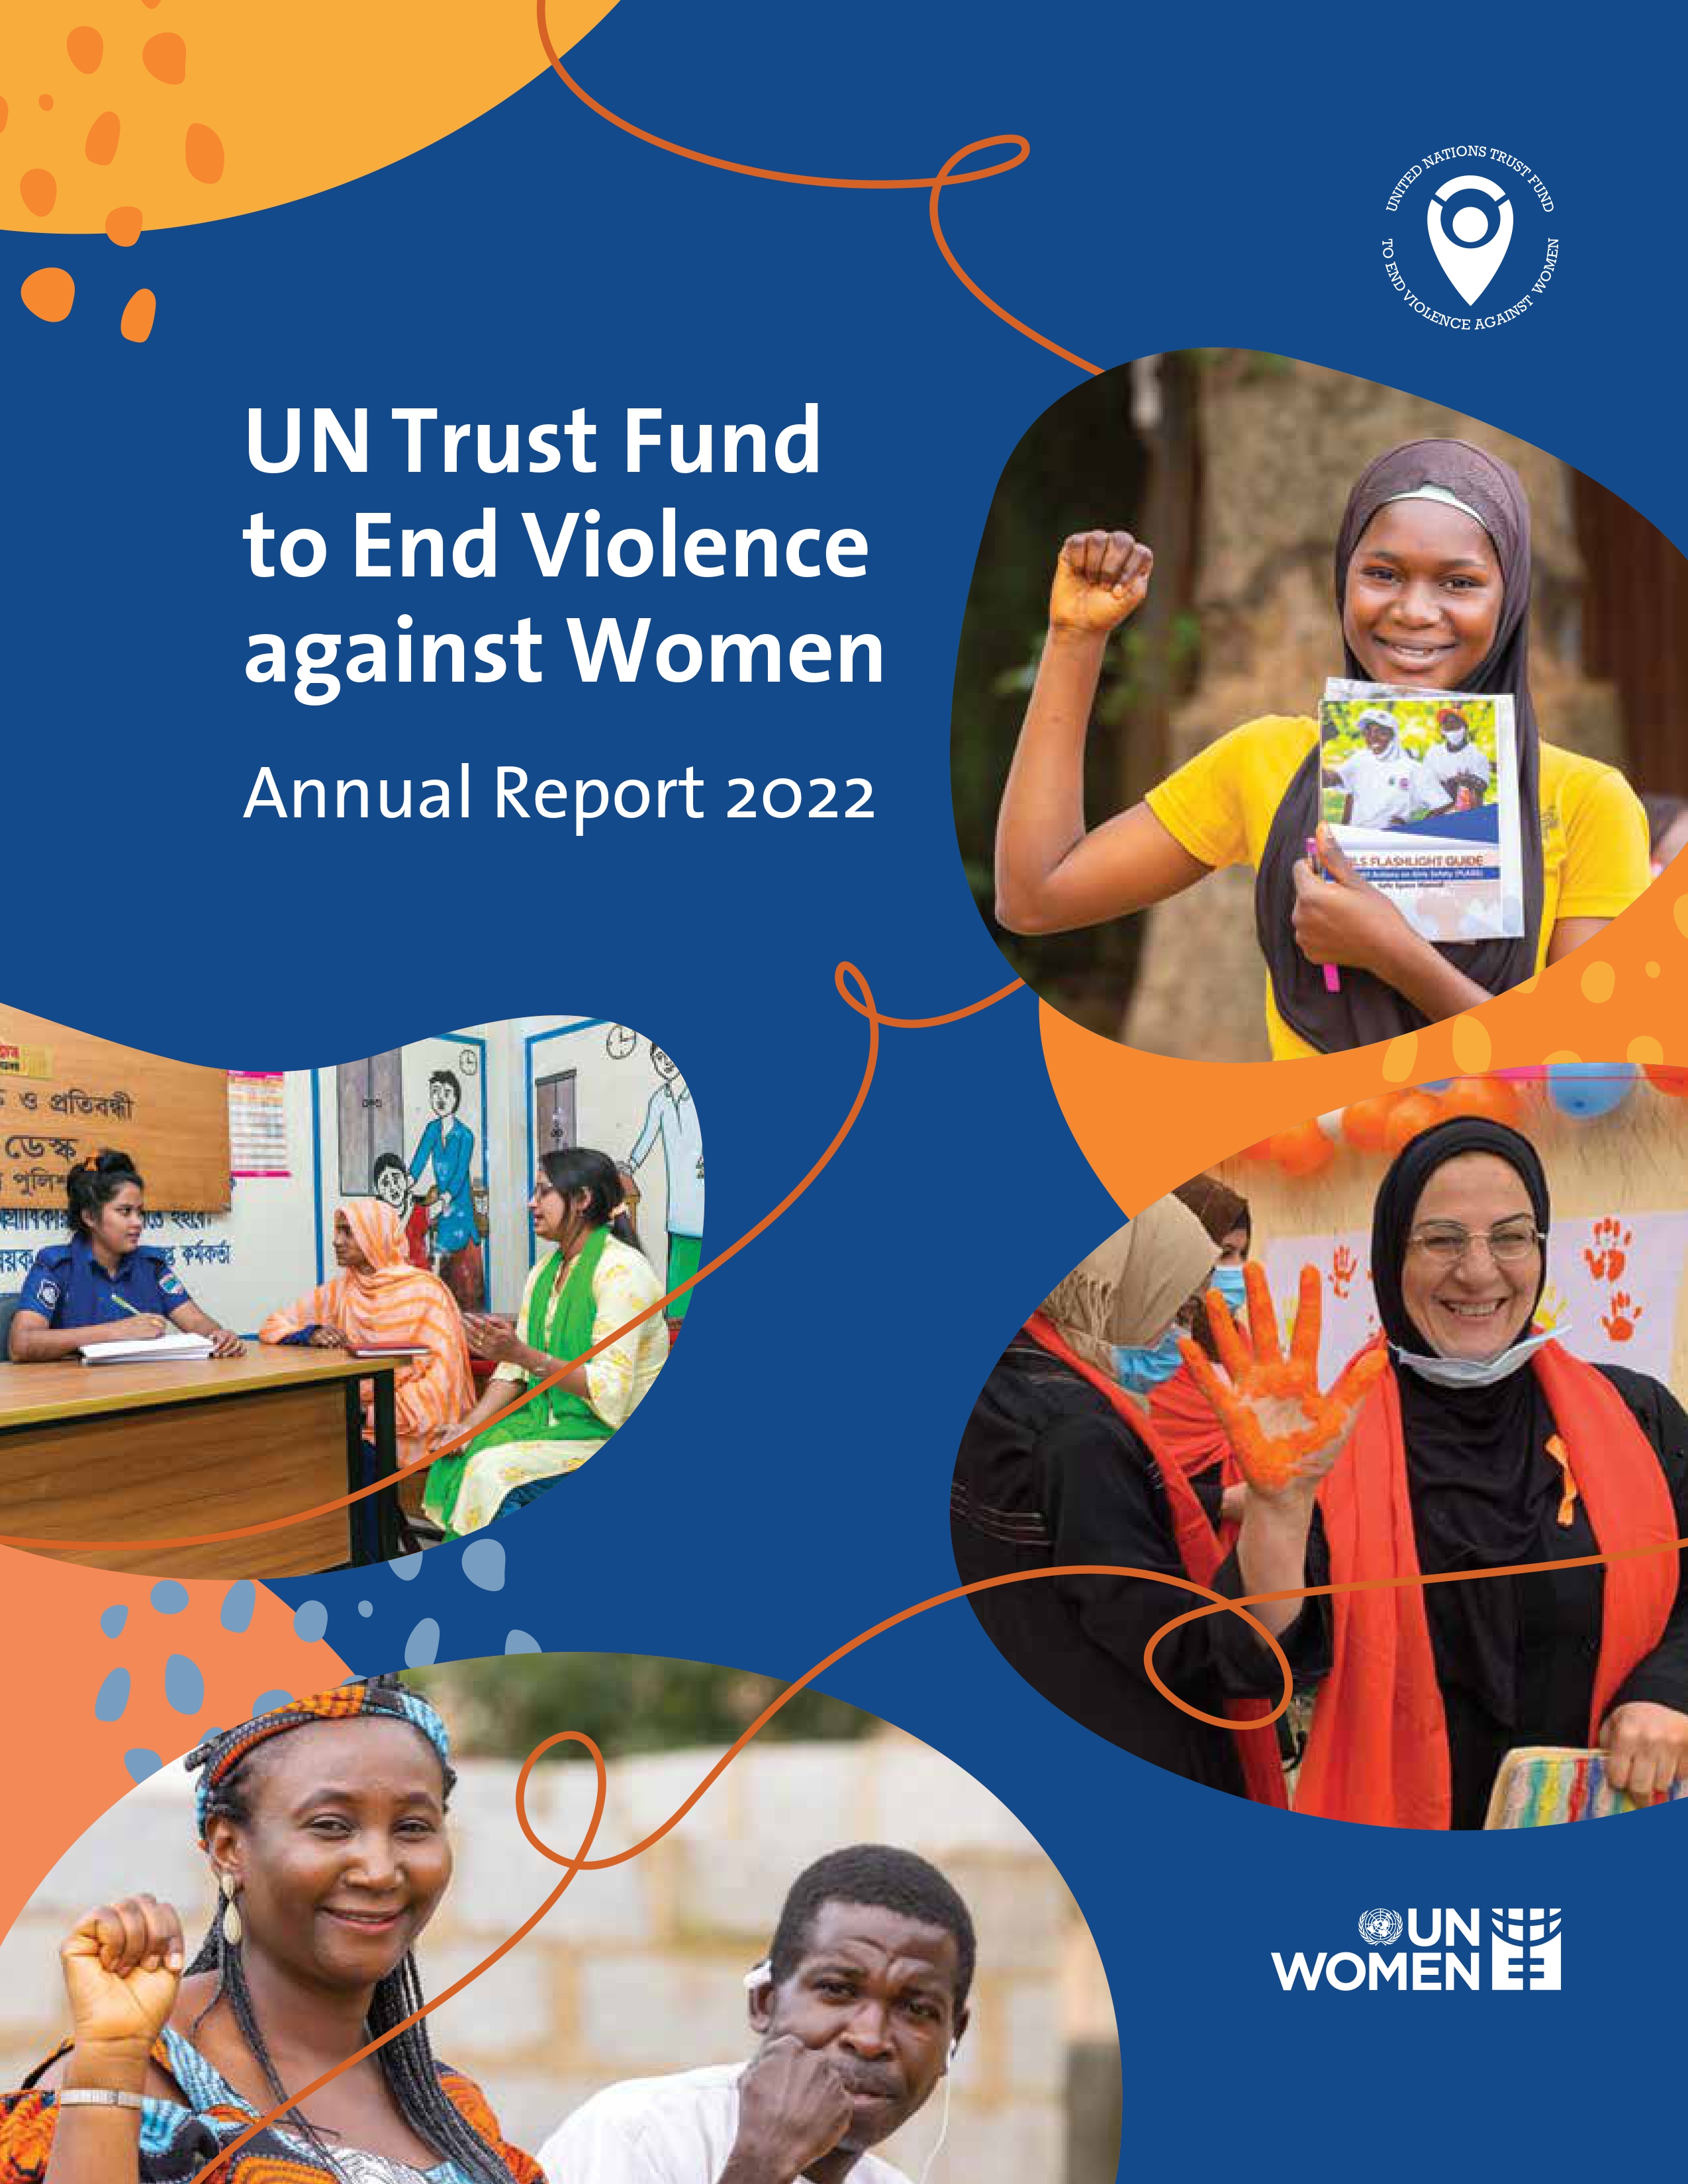 UN Trust Fund to End Violence against Women Annual Report 2022